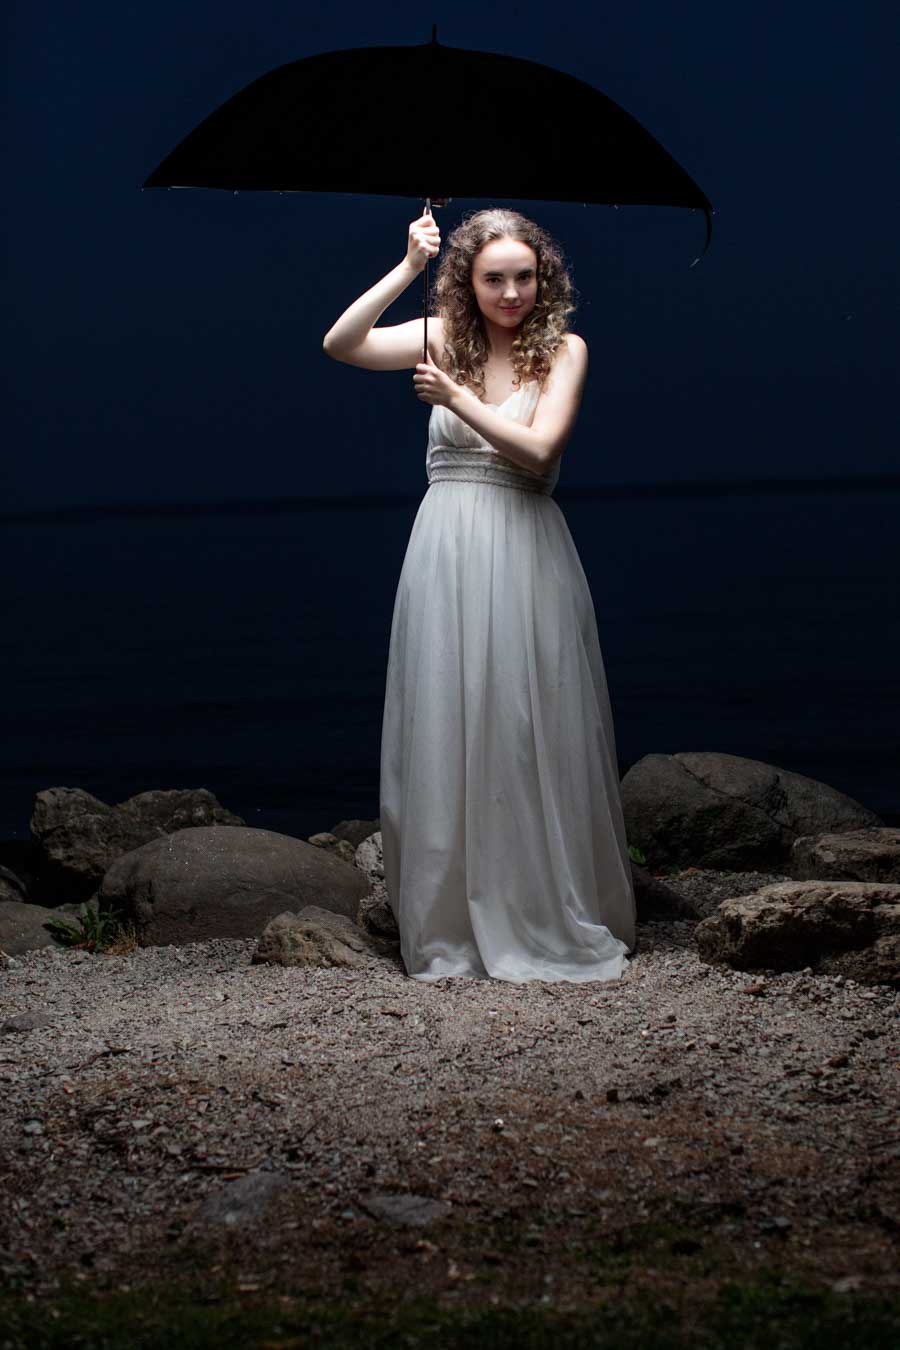 Young model in white dress at night
